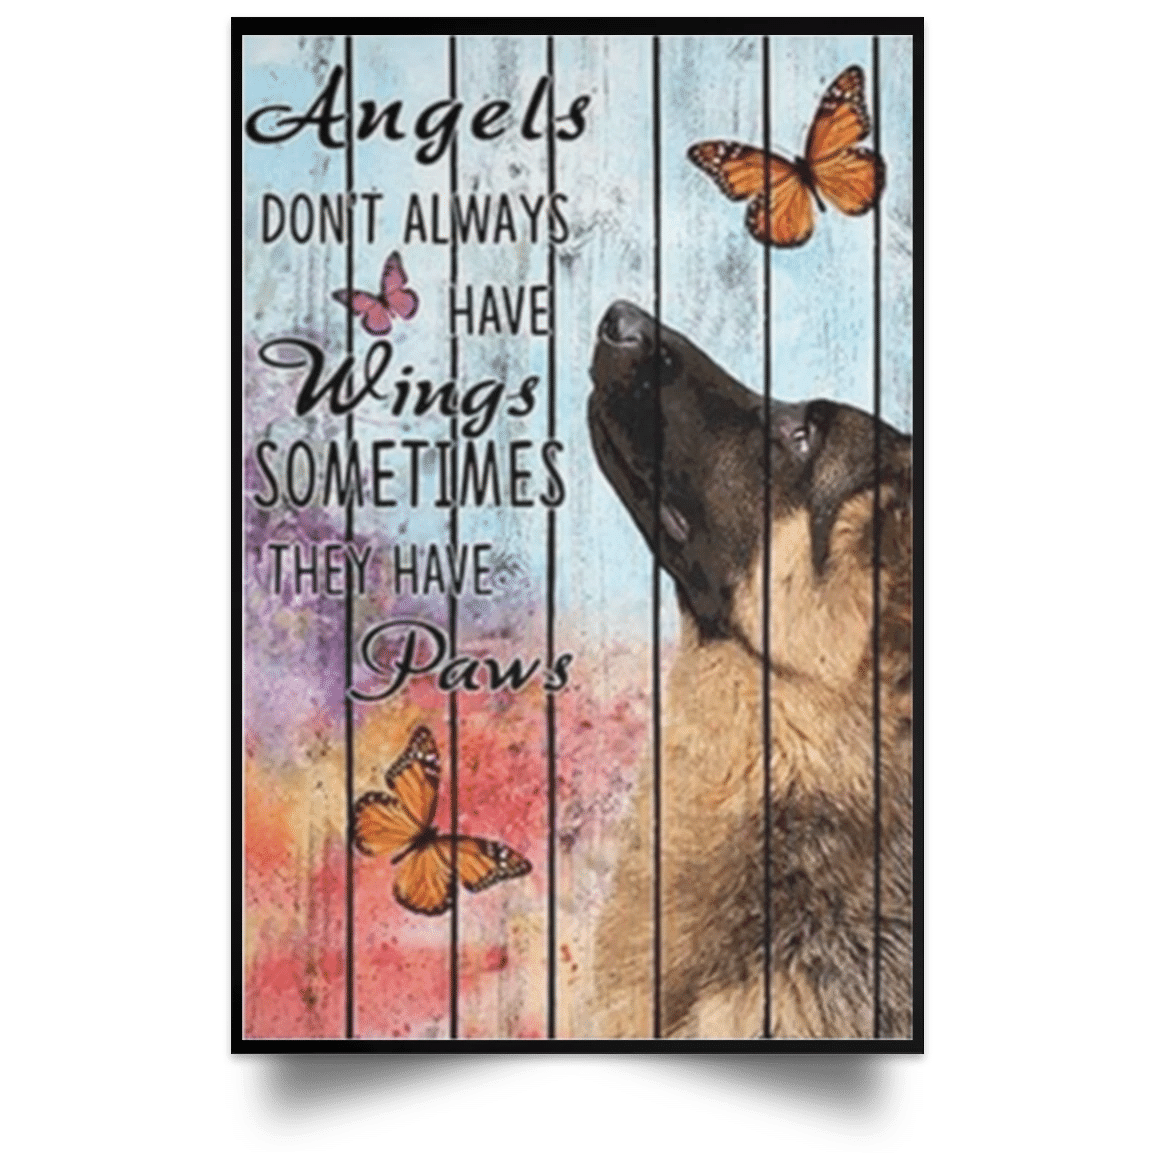 German Shepherd Angels Don't Always Have Wings Poster Graphic Vintage Poster For Home Decor